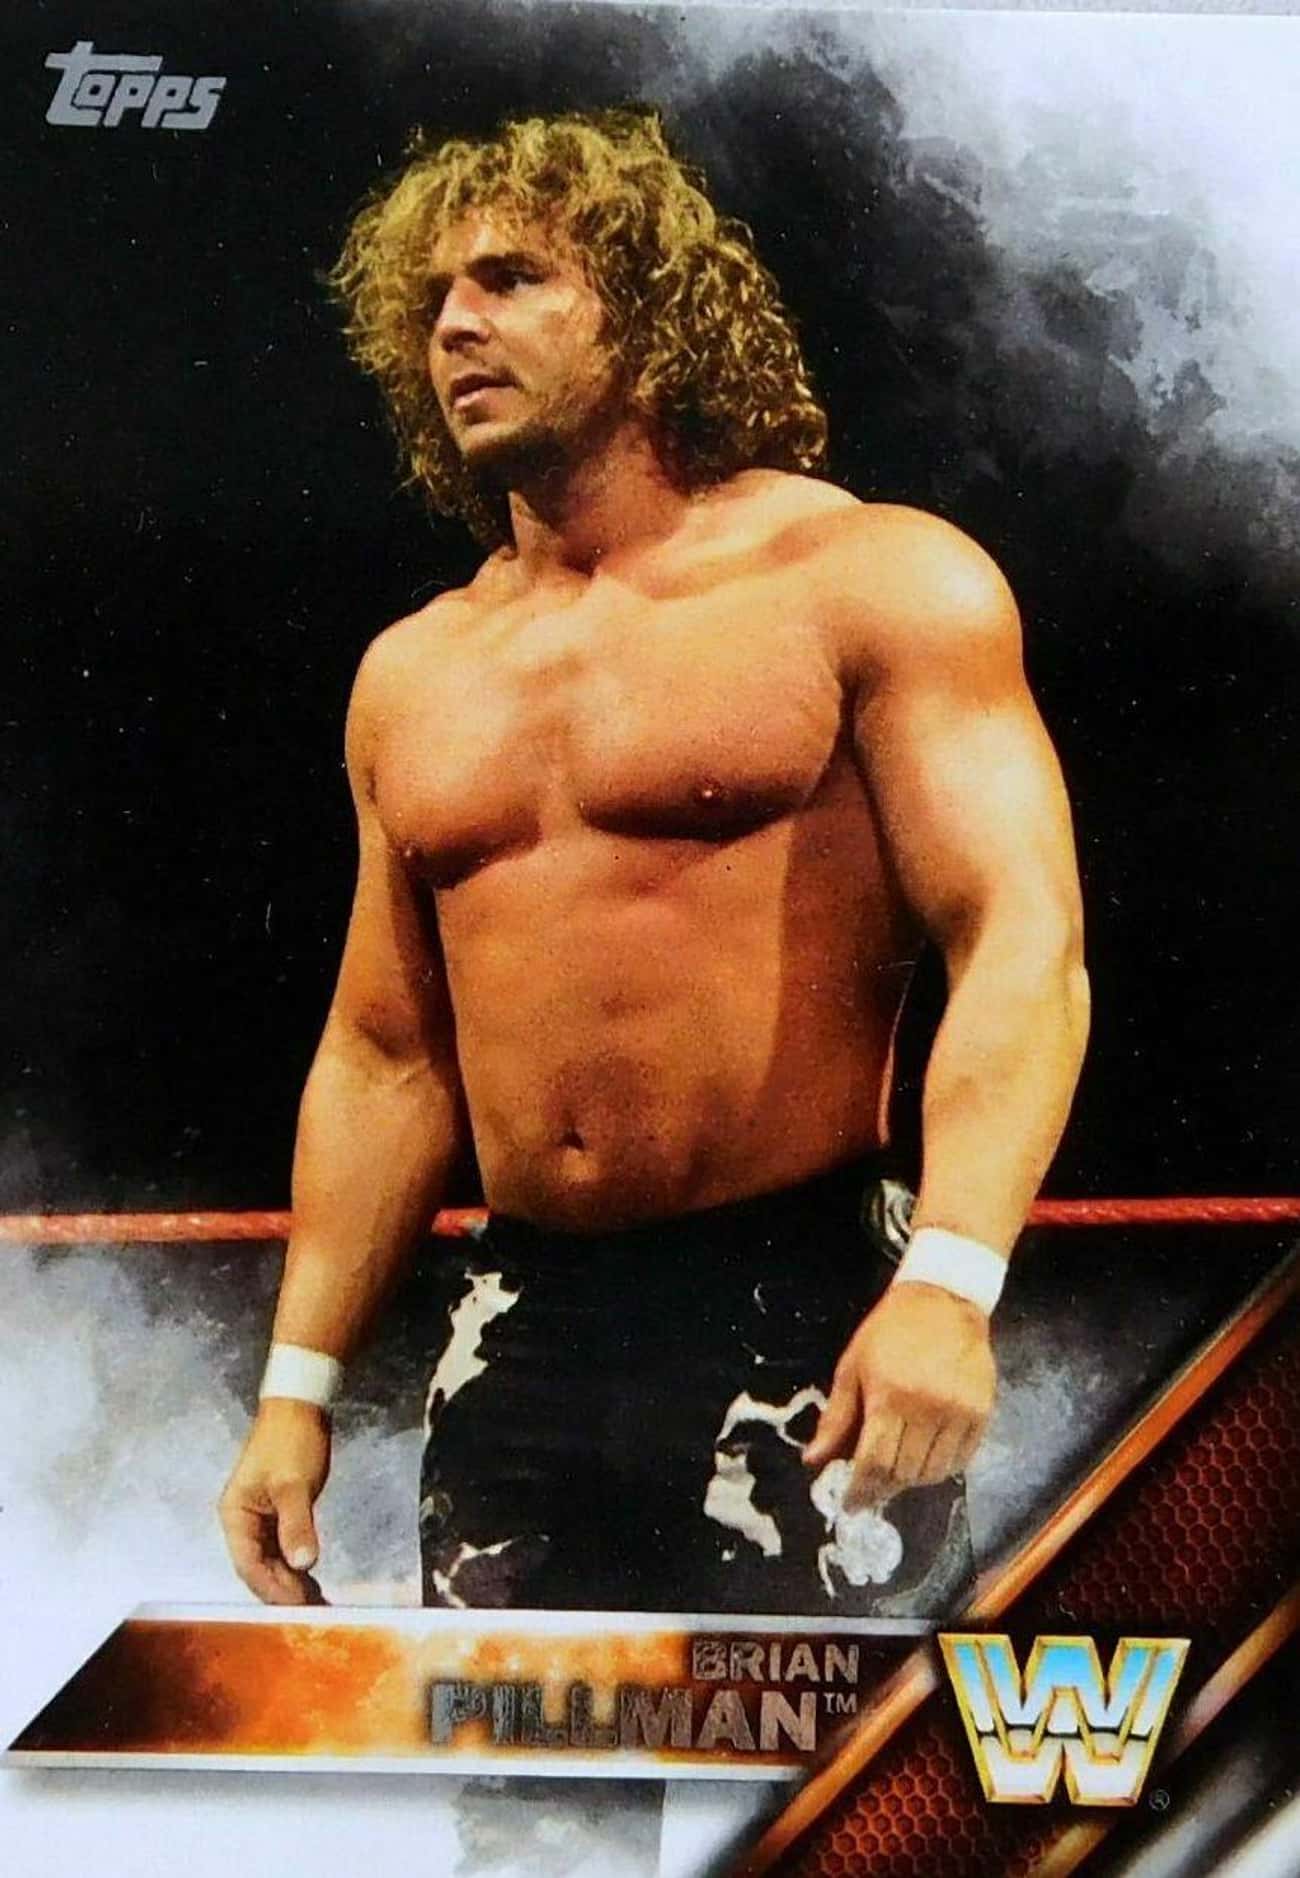 Who was Brian Pillman and what was his cause of death?